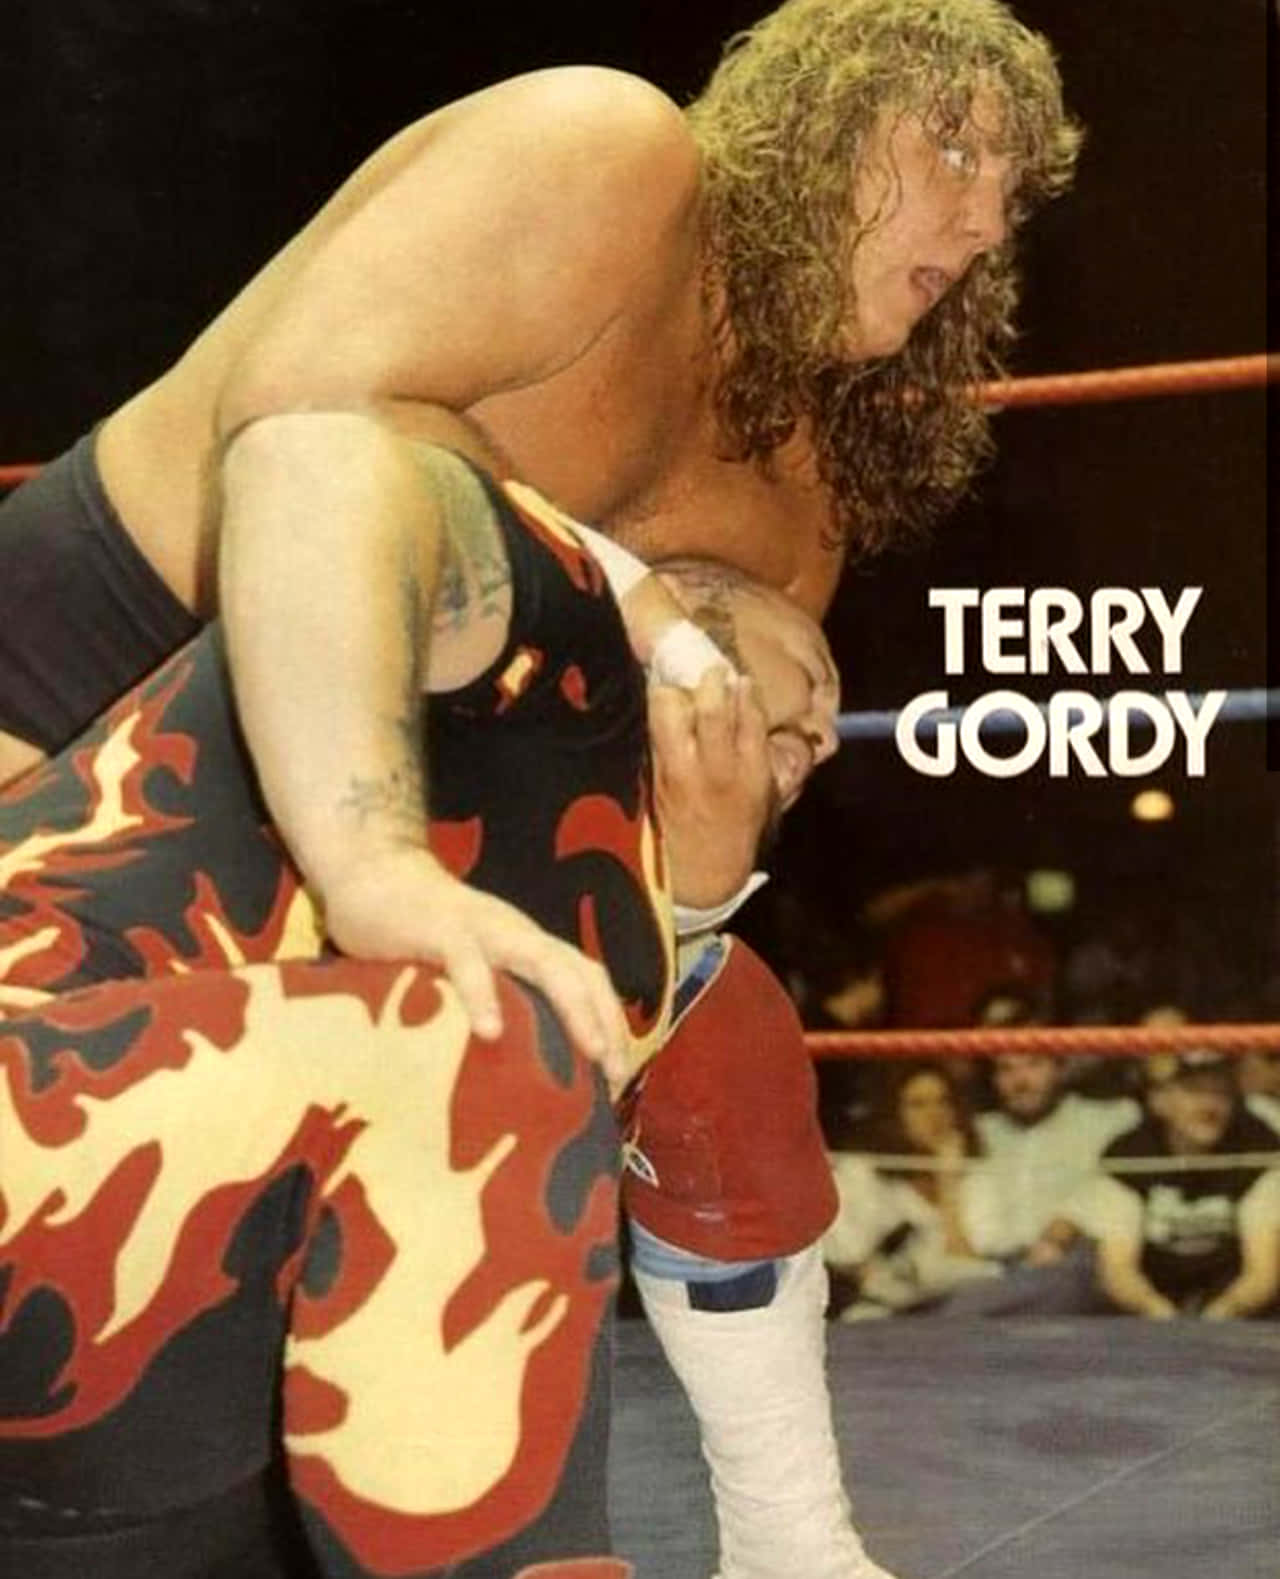 Wrestlers Terry Gordy And Bam Bam Bigelow Wallpaper